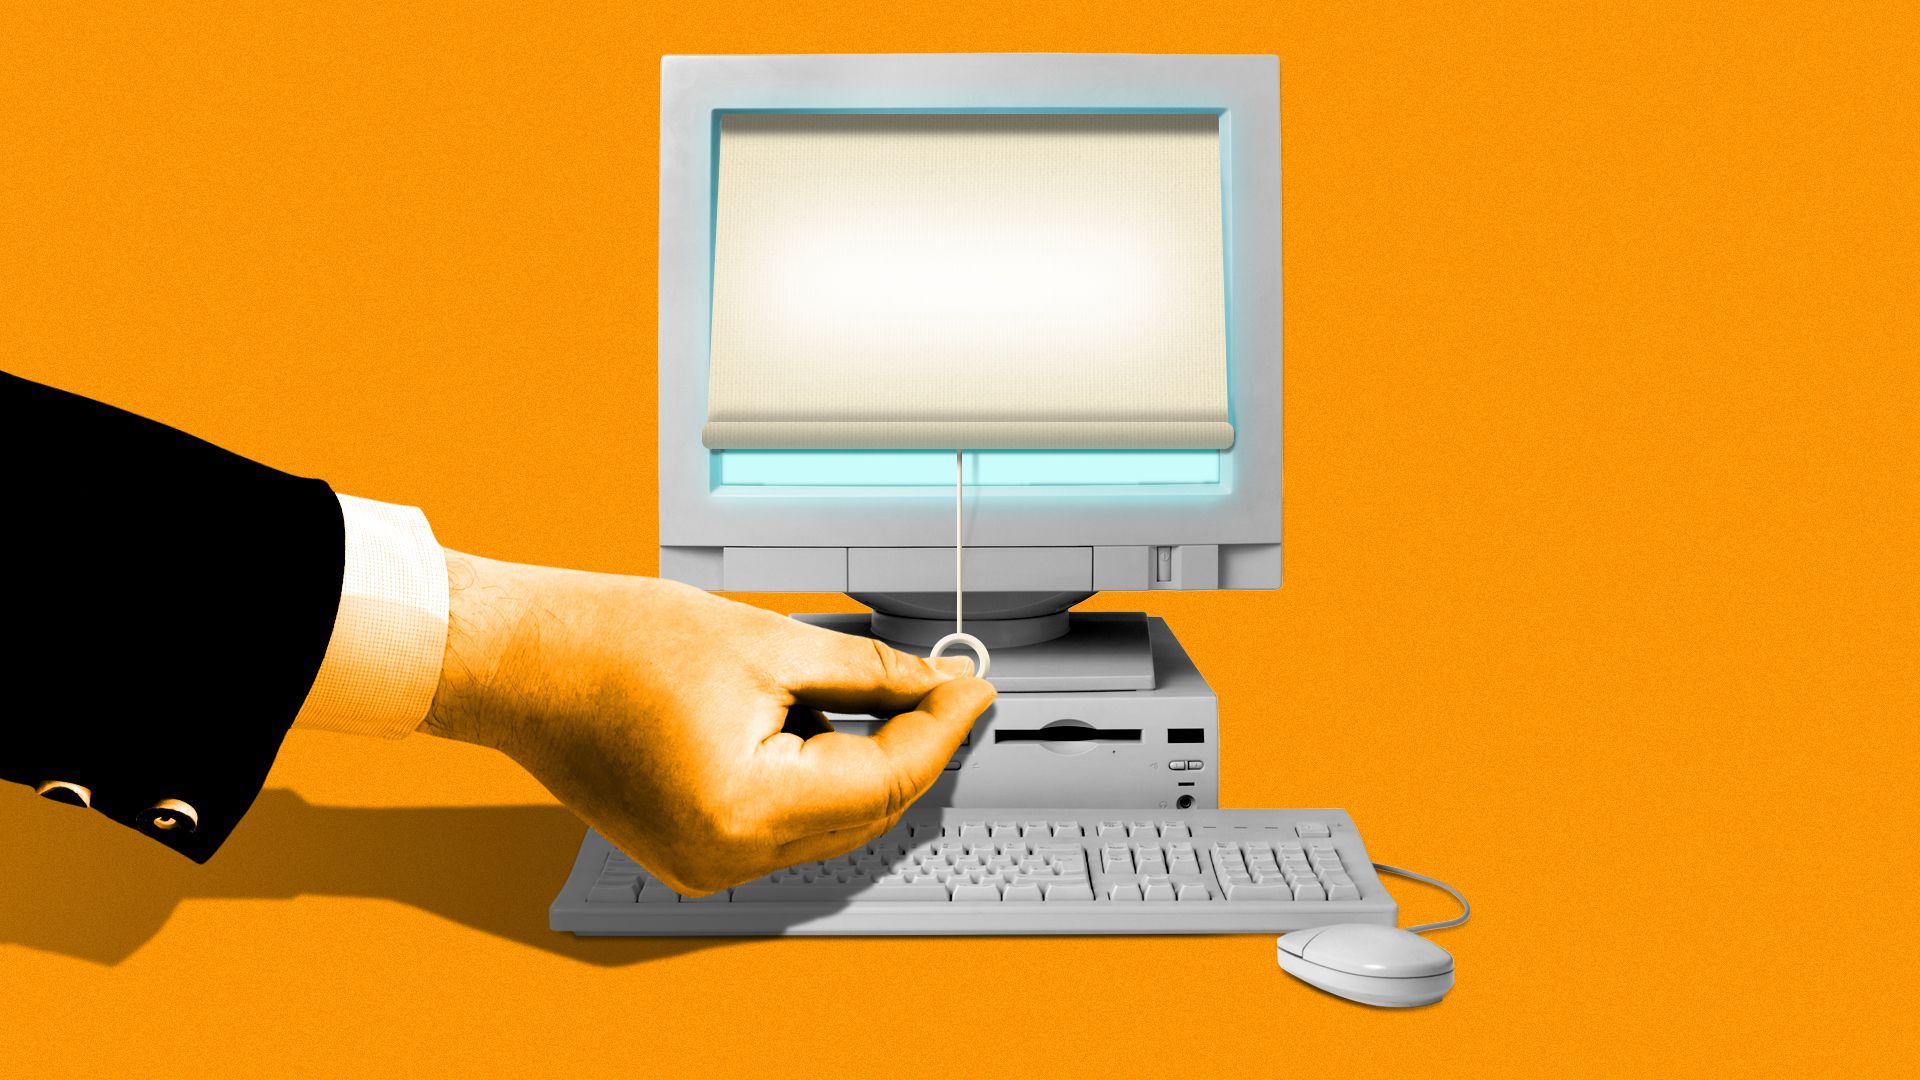 Illustration of a hand in a suit pulling a shade down on a computer screen